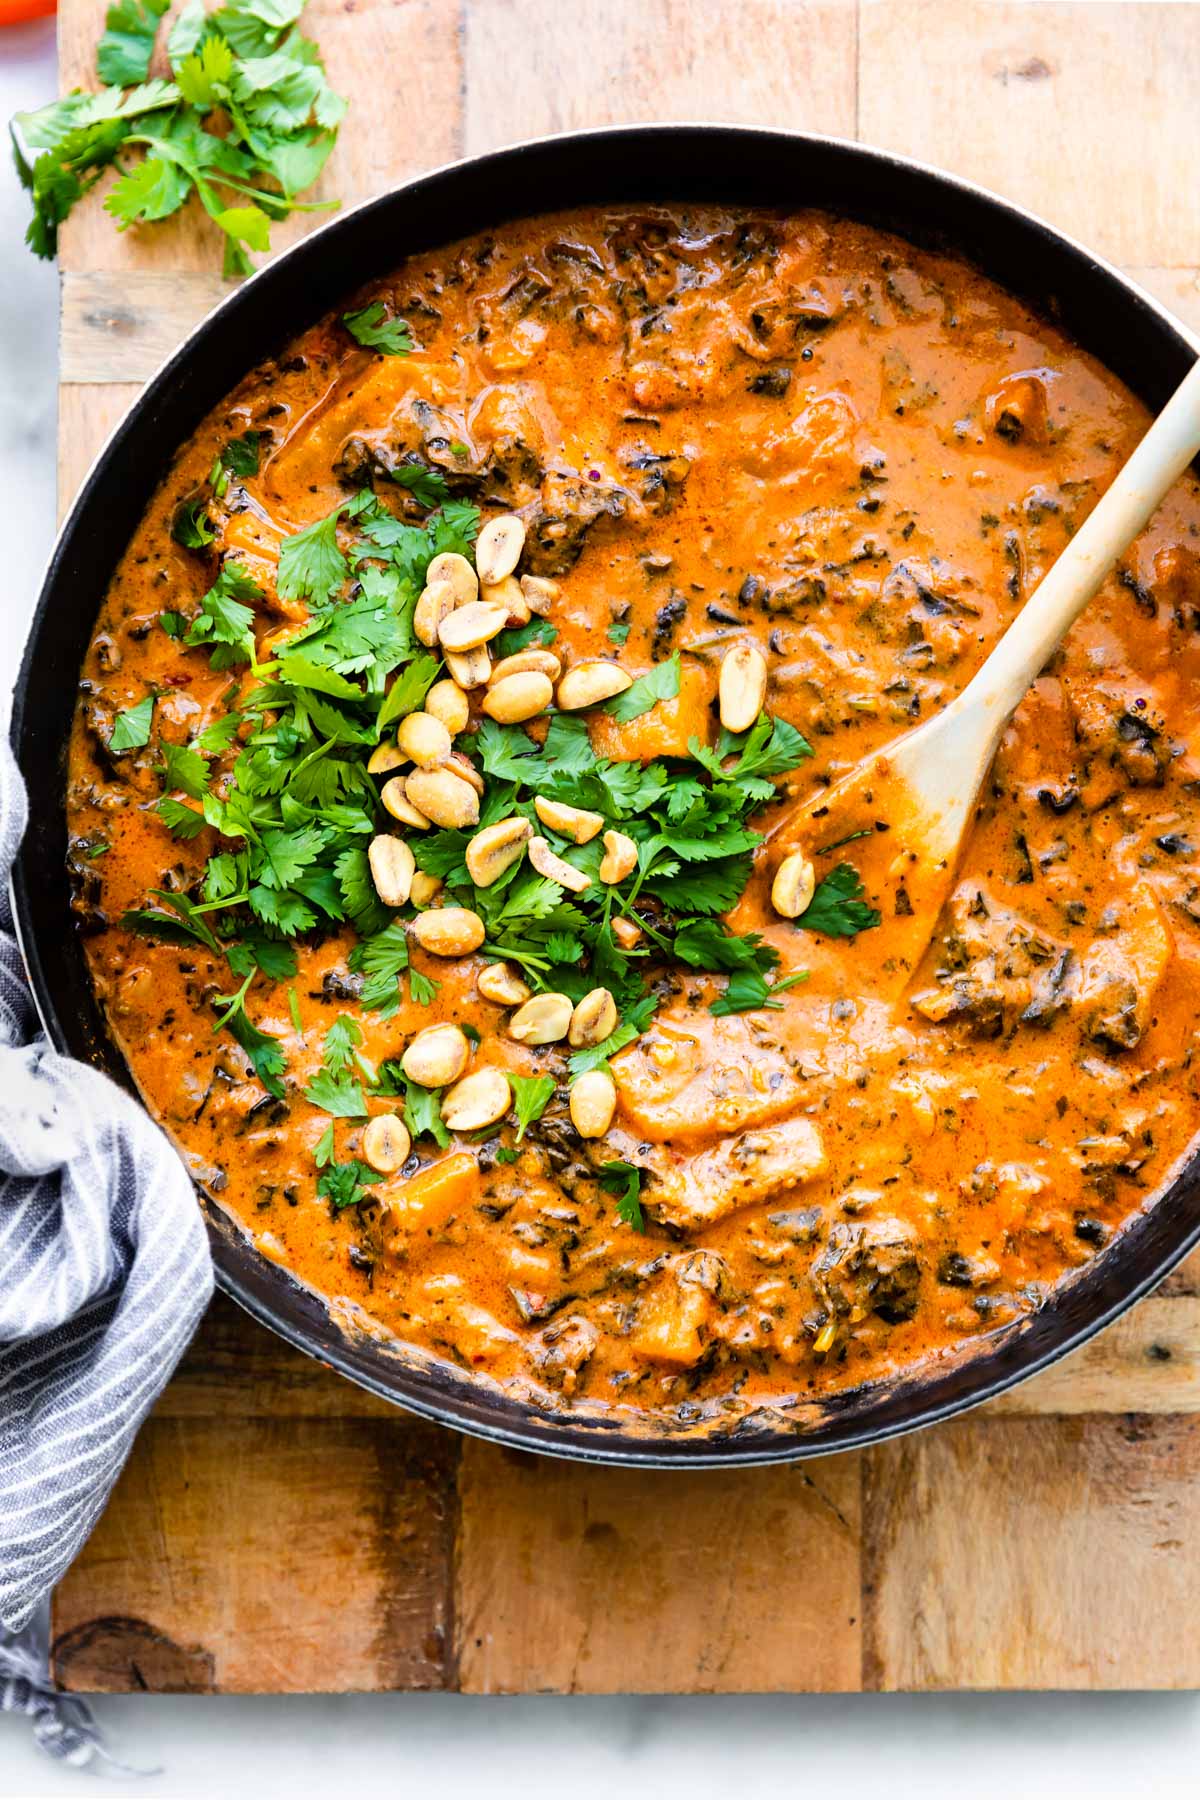 overhead photo: large pot of peanut stew; wooden spoon stirring fresh herbs in